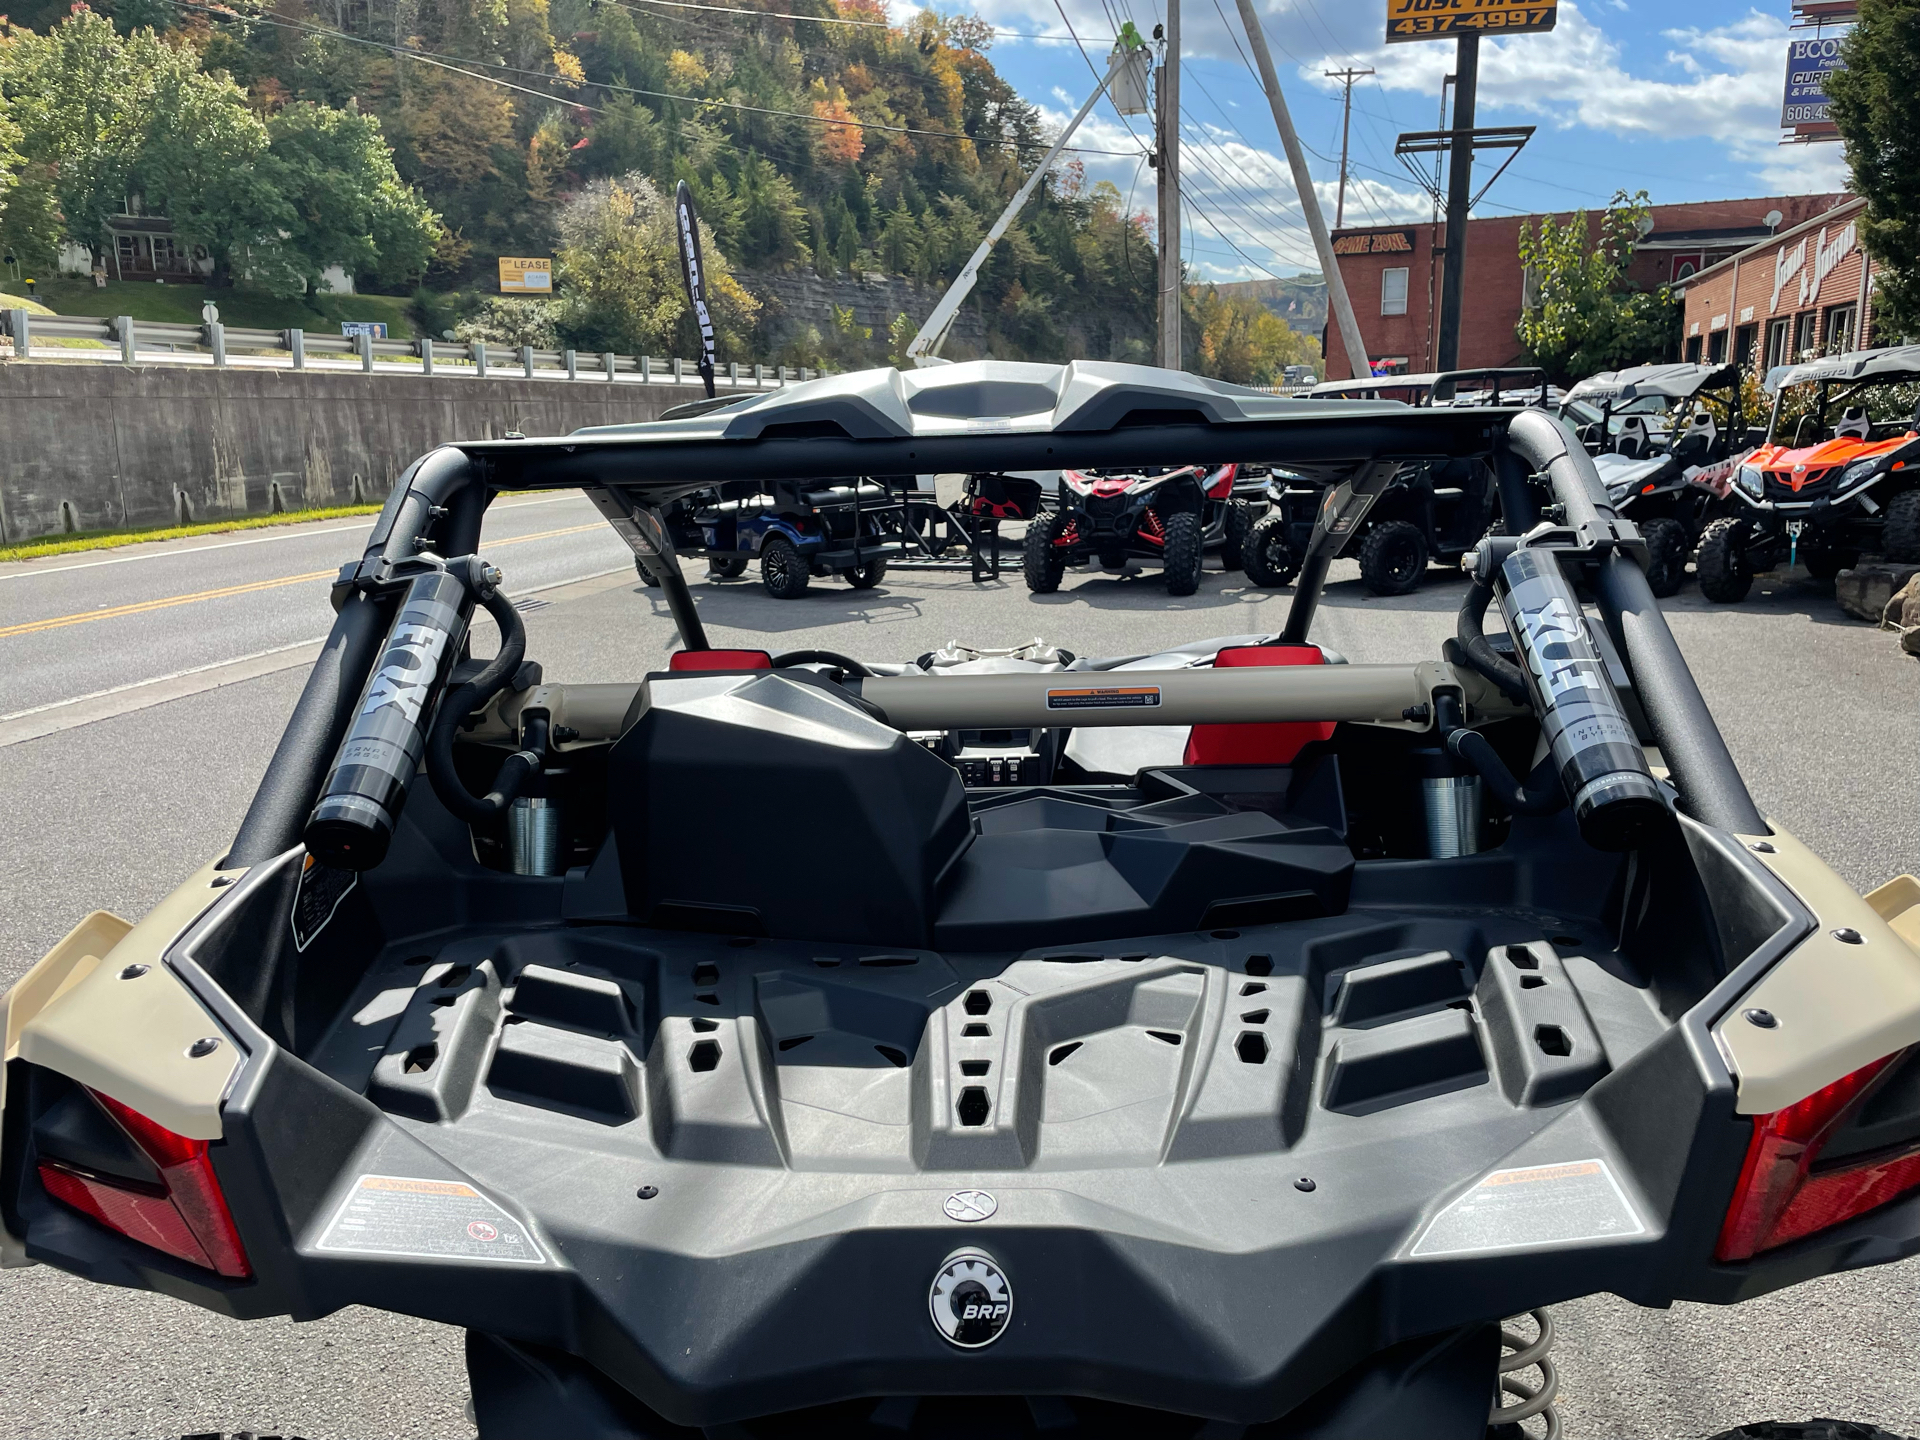 2022 Can-Am Maverick X3 X RS Turbo RR in Pikeville, Kentucky - Photo 15